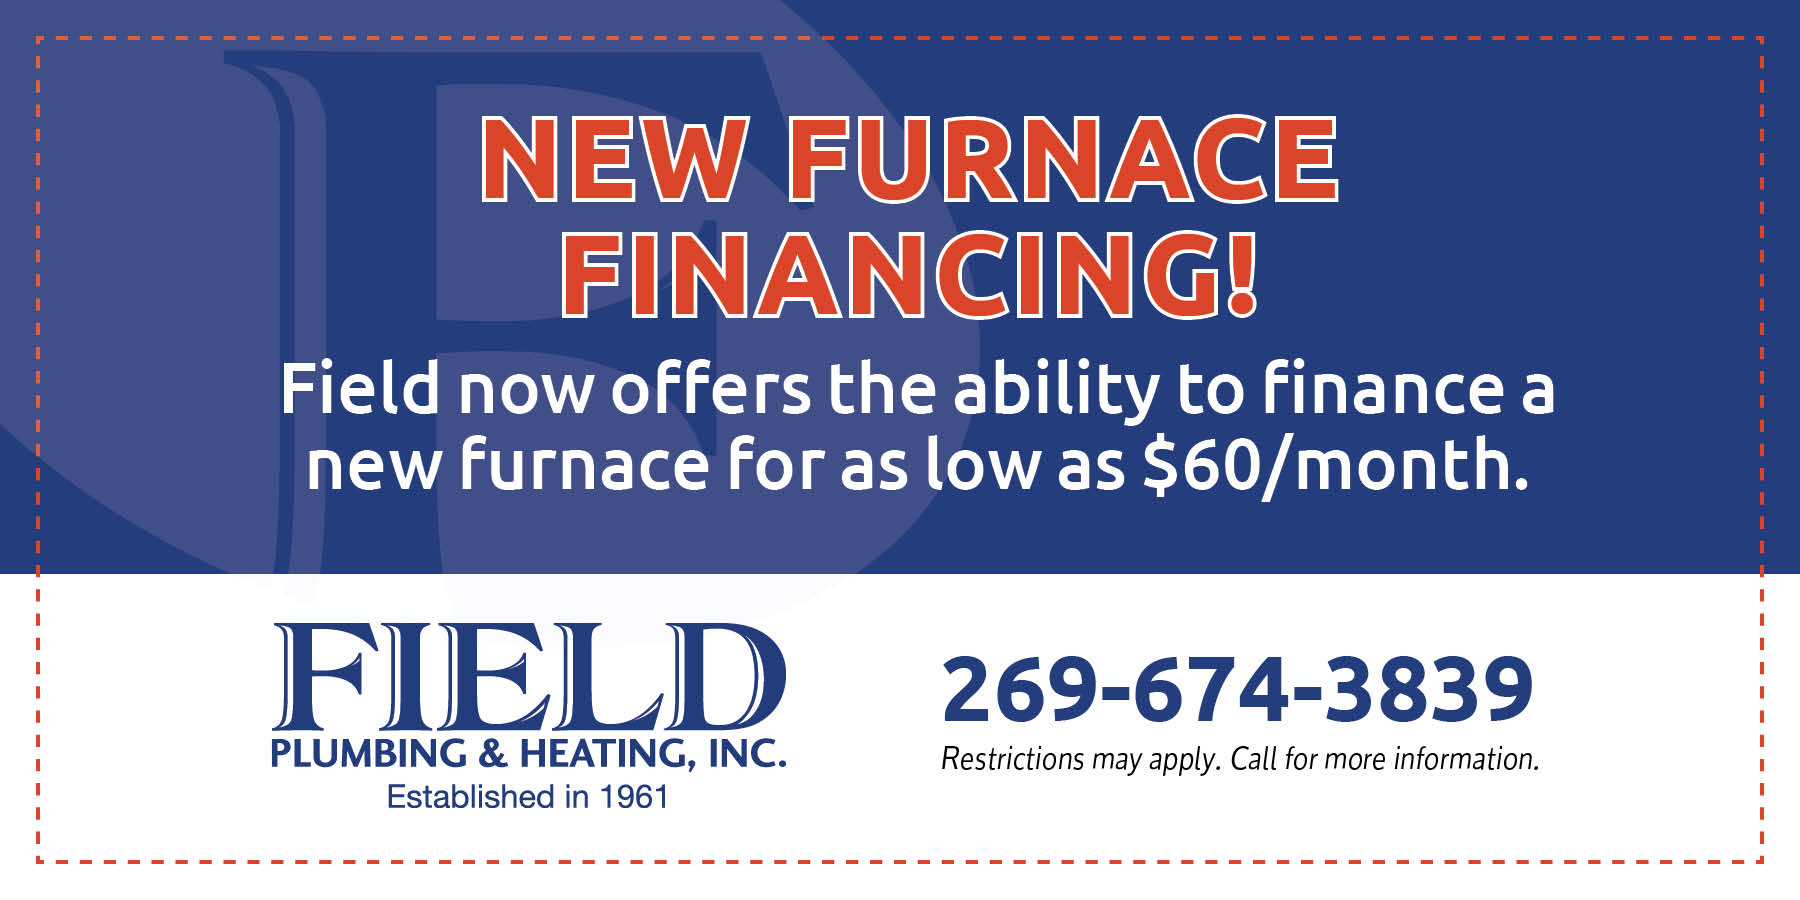 FPH field furnace financing for as low as $60 a month.